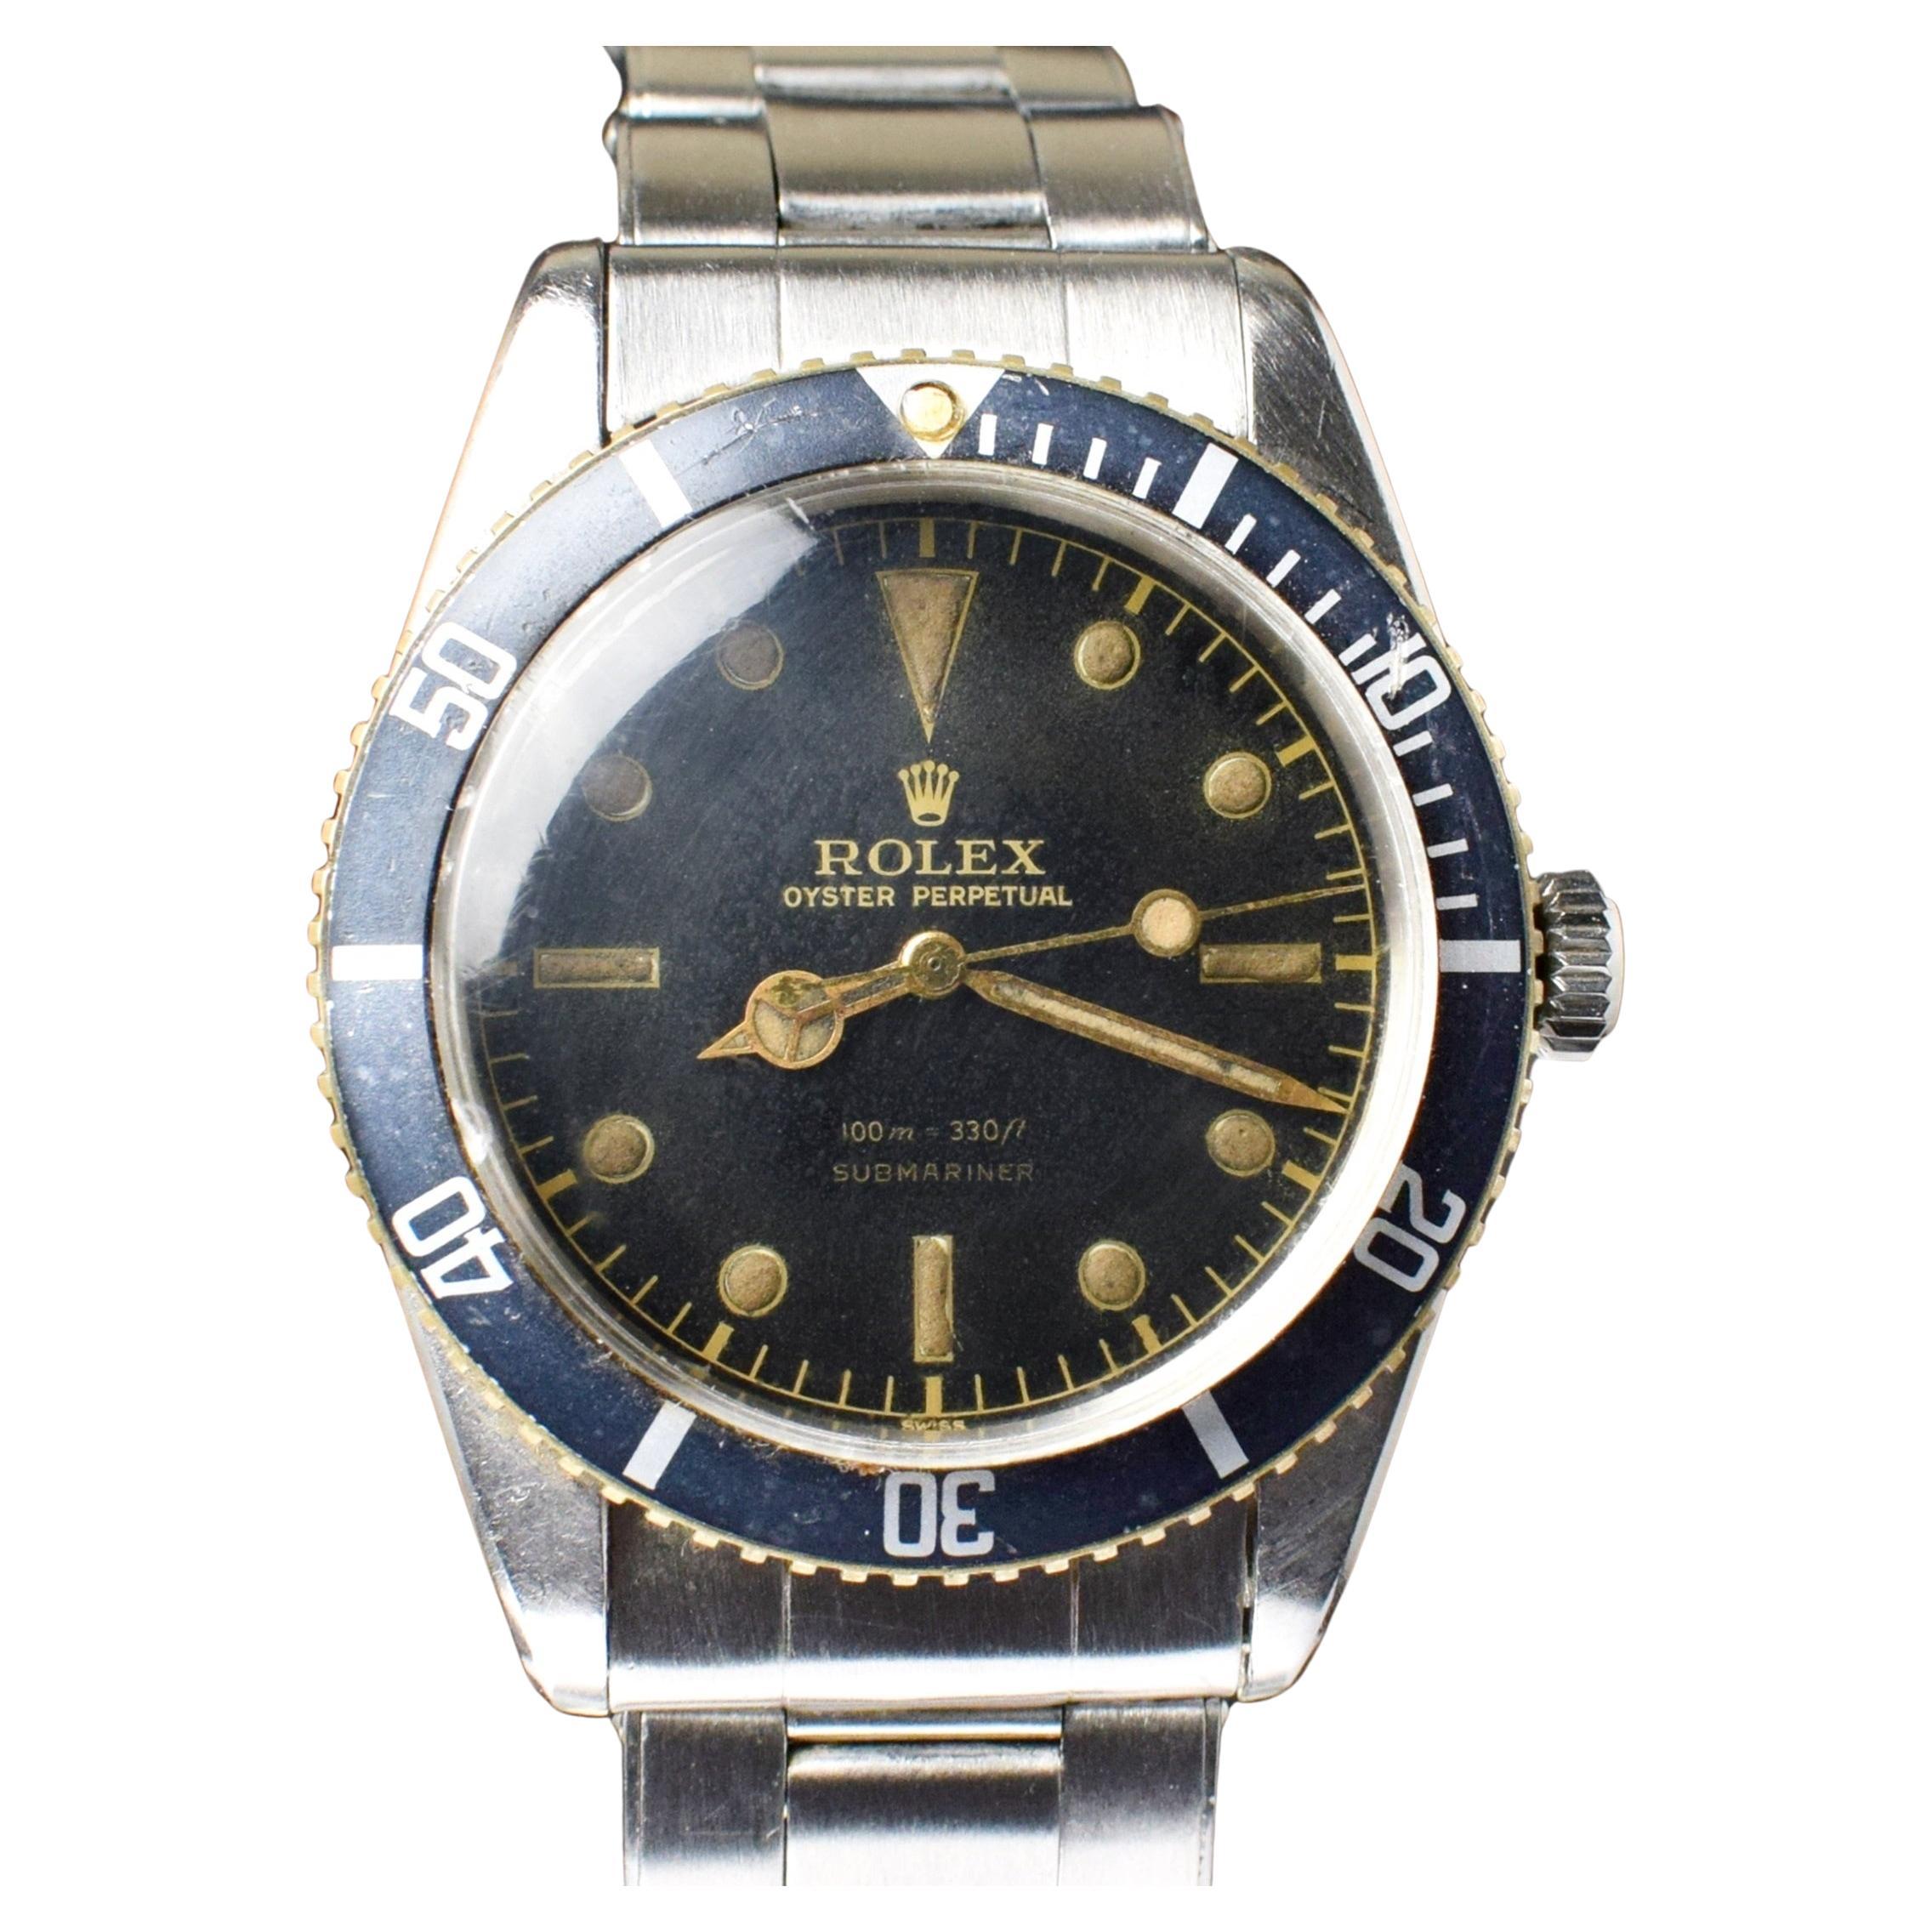 Rolex Submariner Small Crown Gilt Dial 6536/1 Steel Automatic Watch 1956